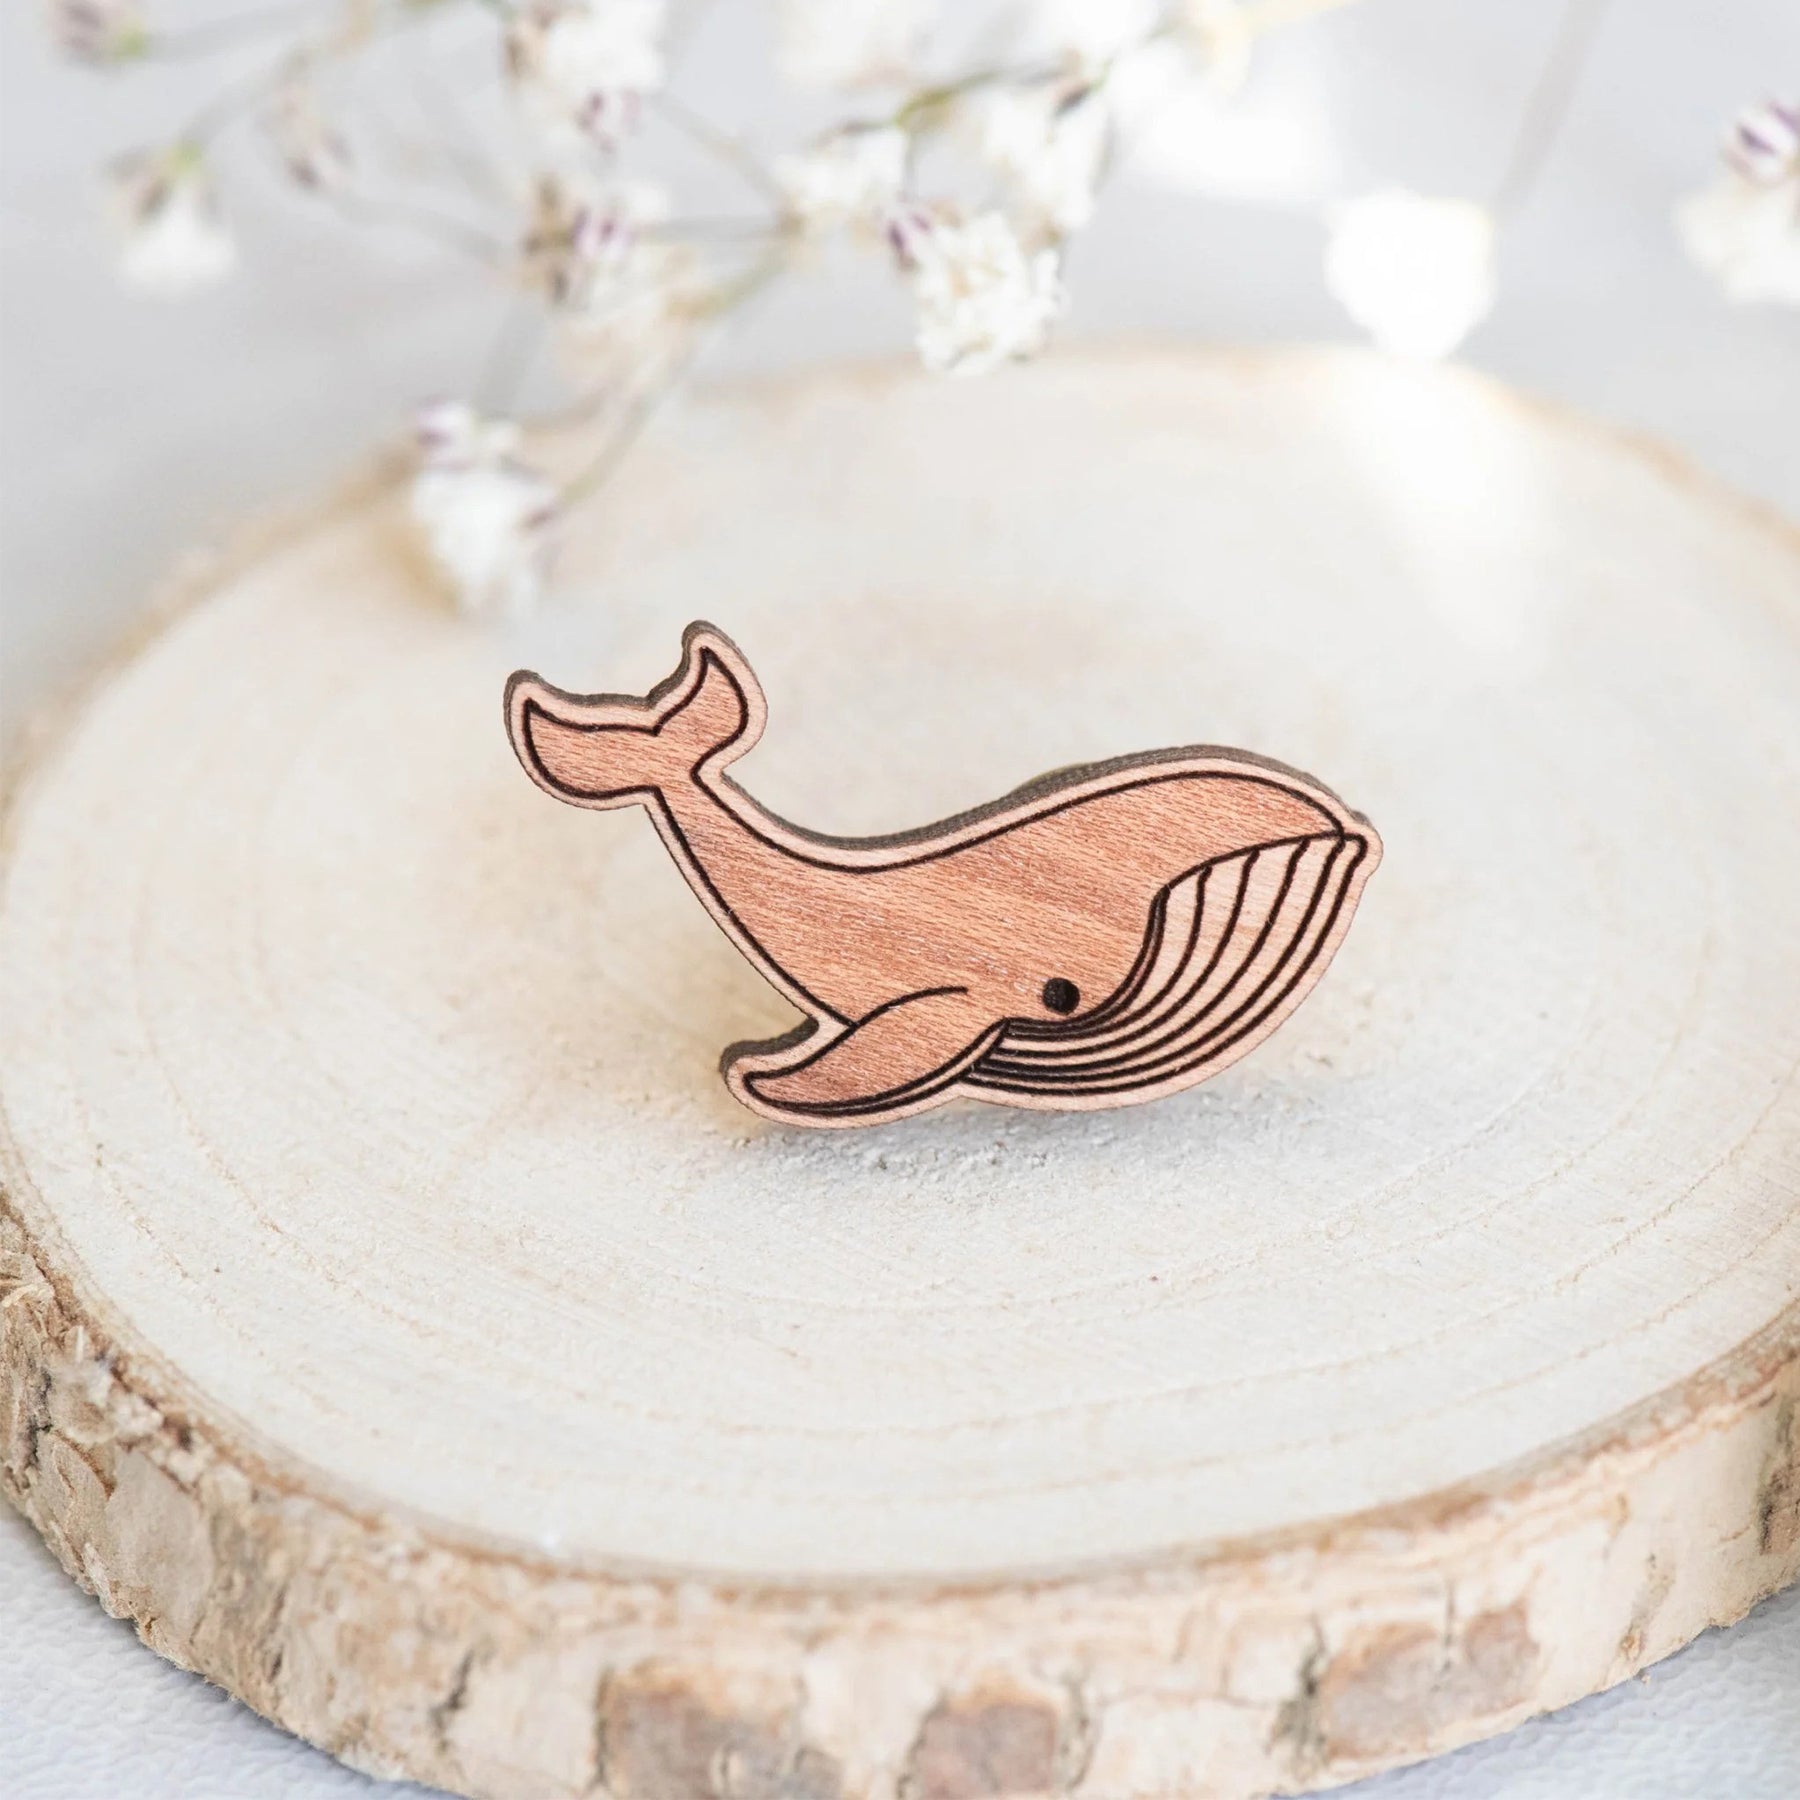 Blue whale cherry wood pin badge